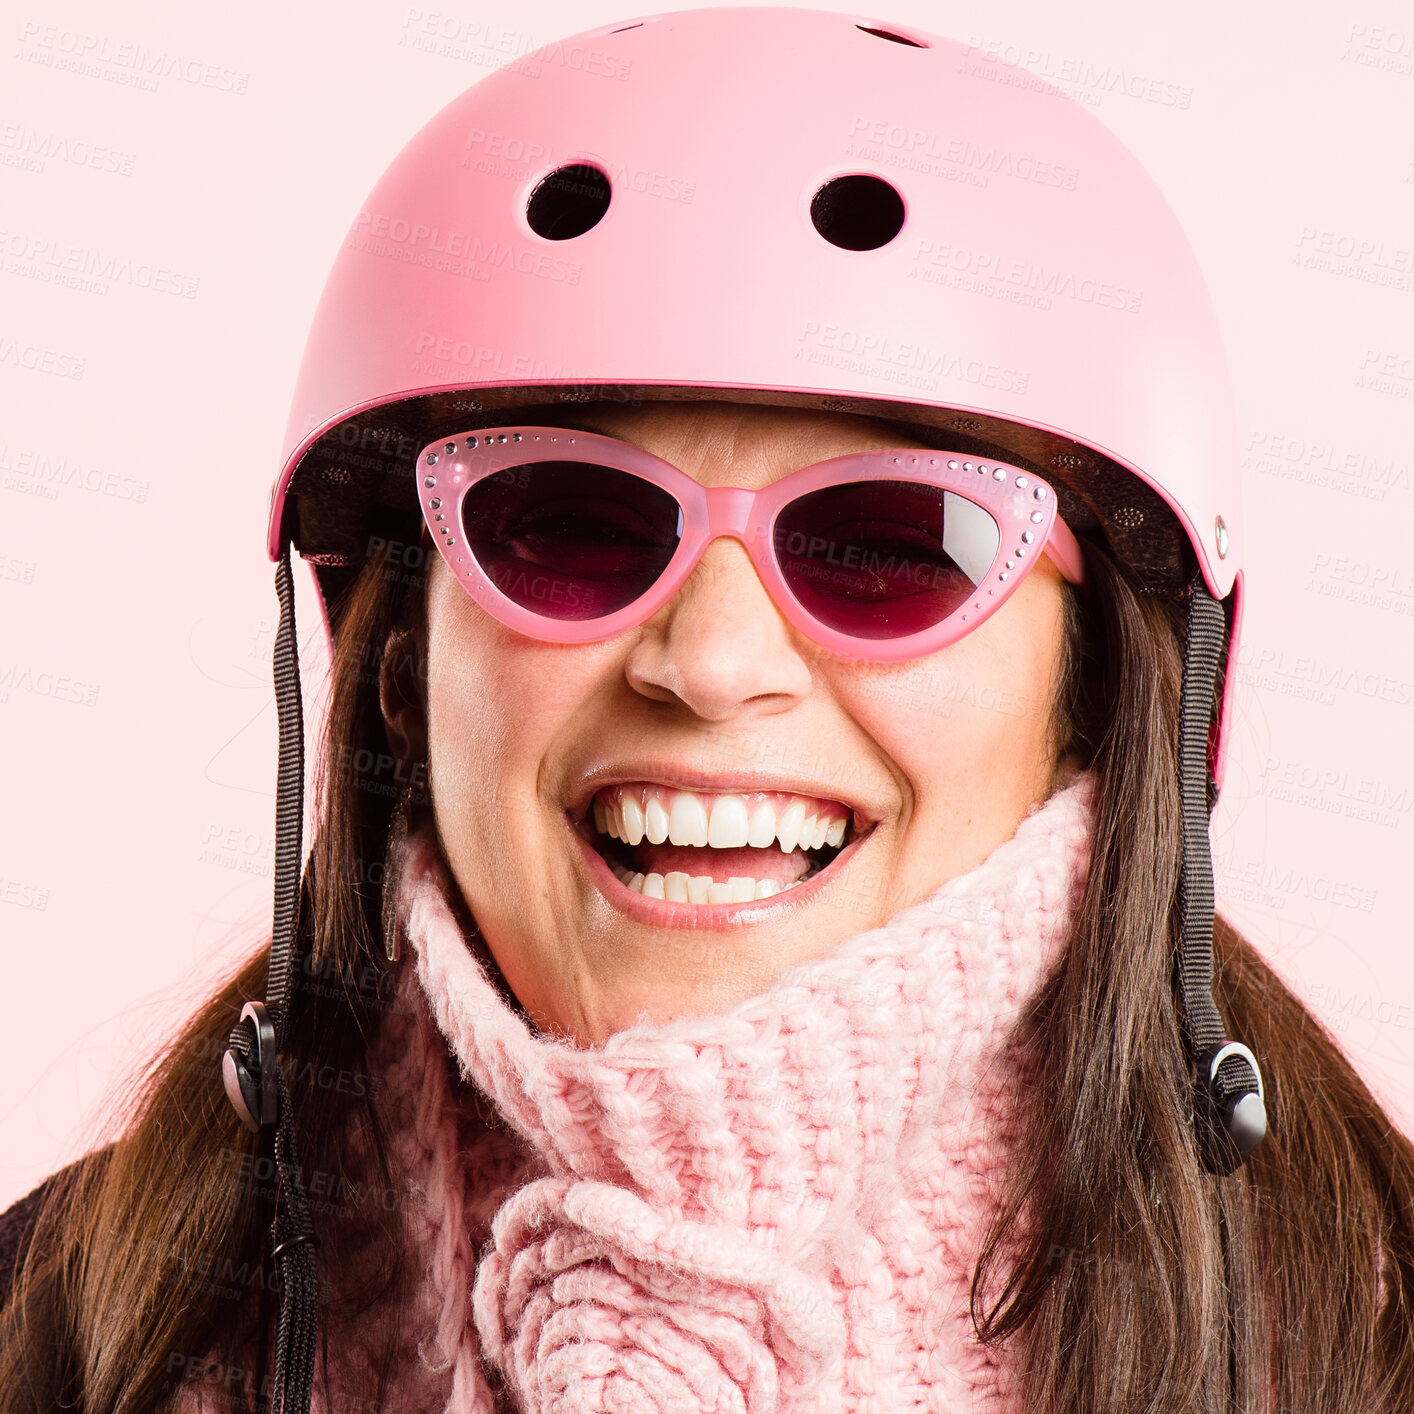 Buy stock photo Shot of a mature woman standing alone in the studio while wearing sunglasses and a helmet